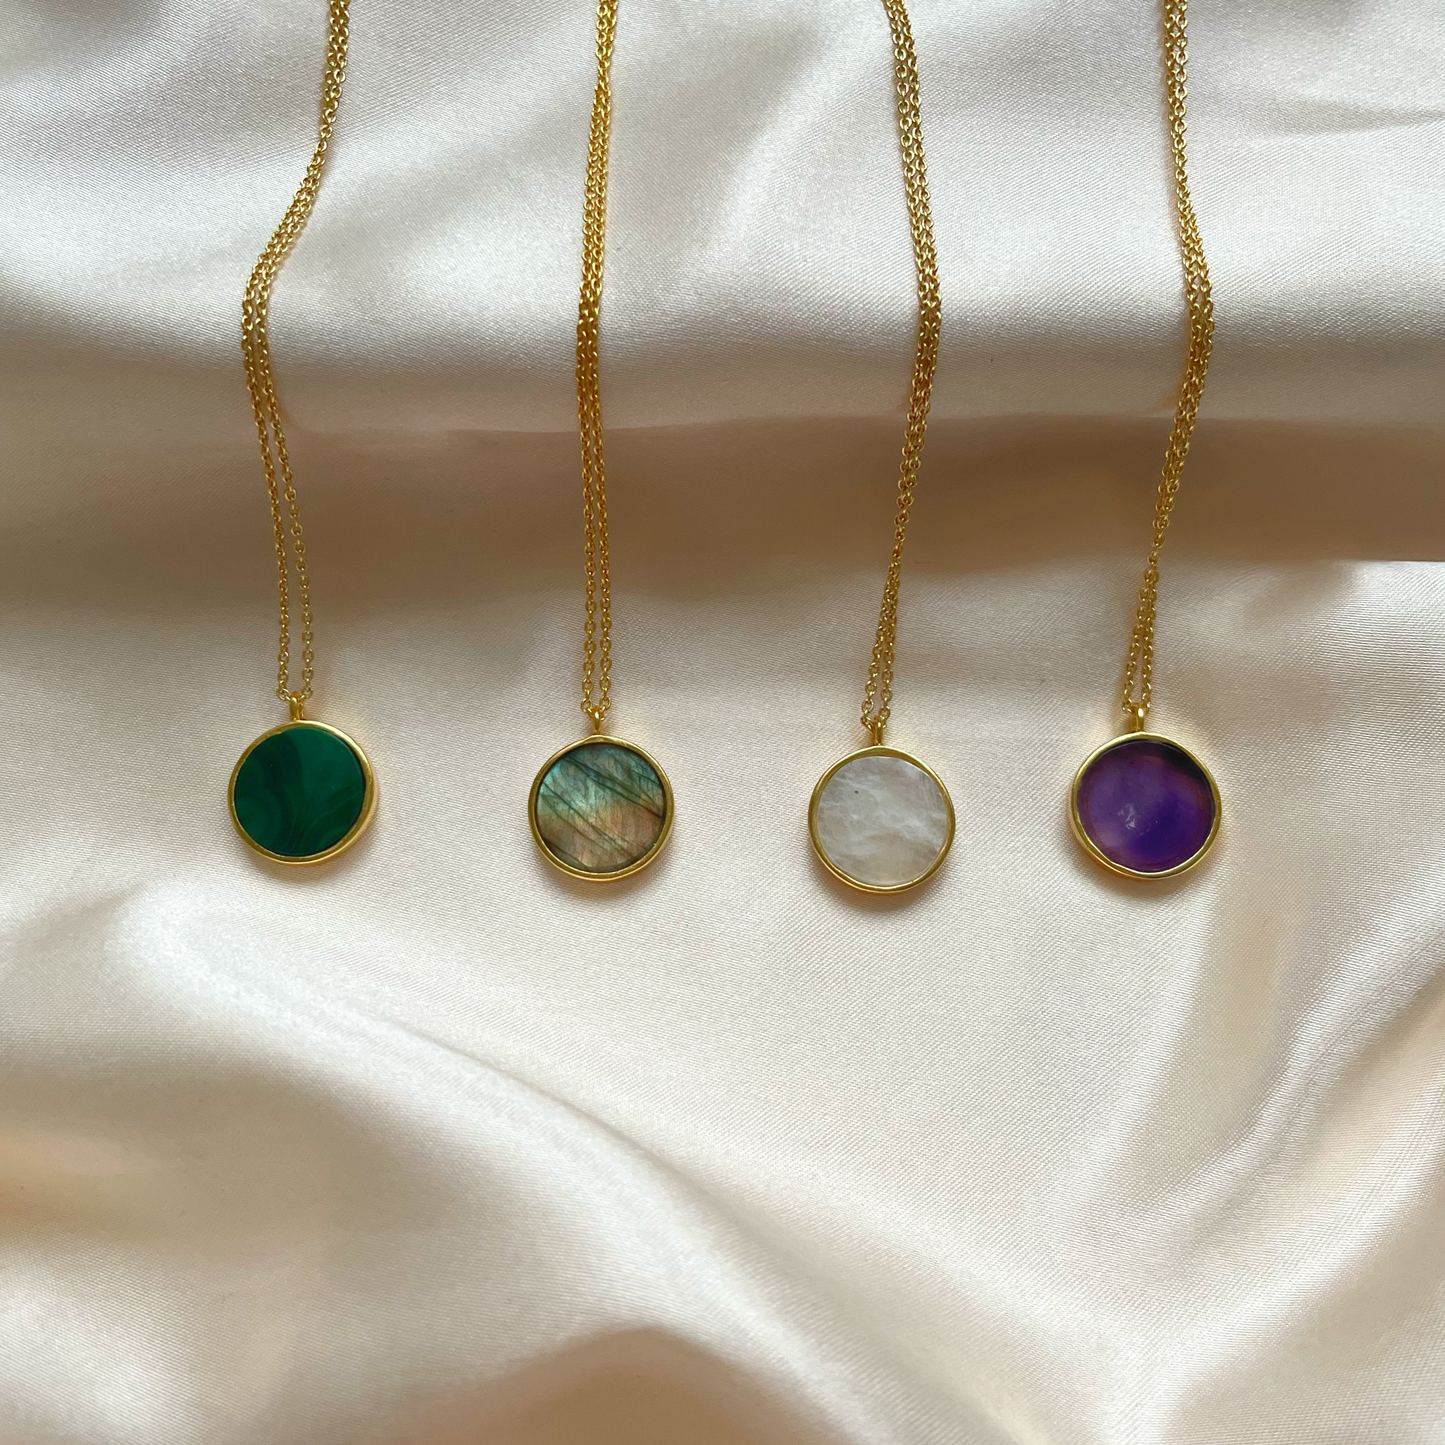 Gemstone coin necklaces in Malachite, Labradorite, Moonstone and Amethyst